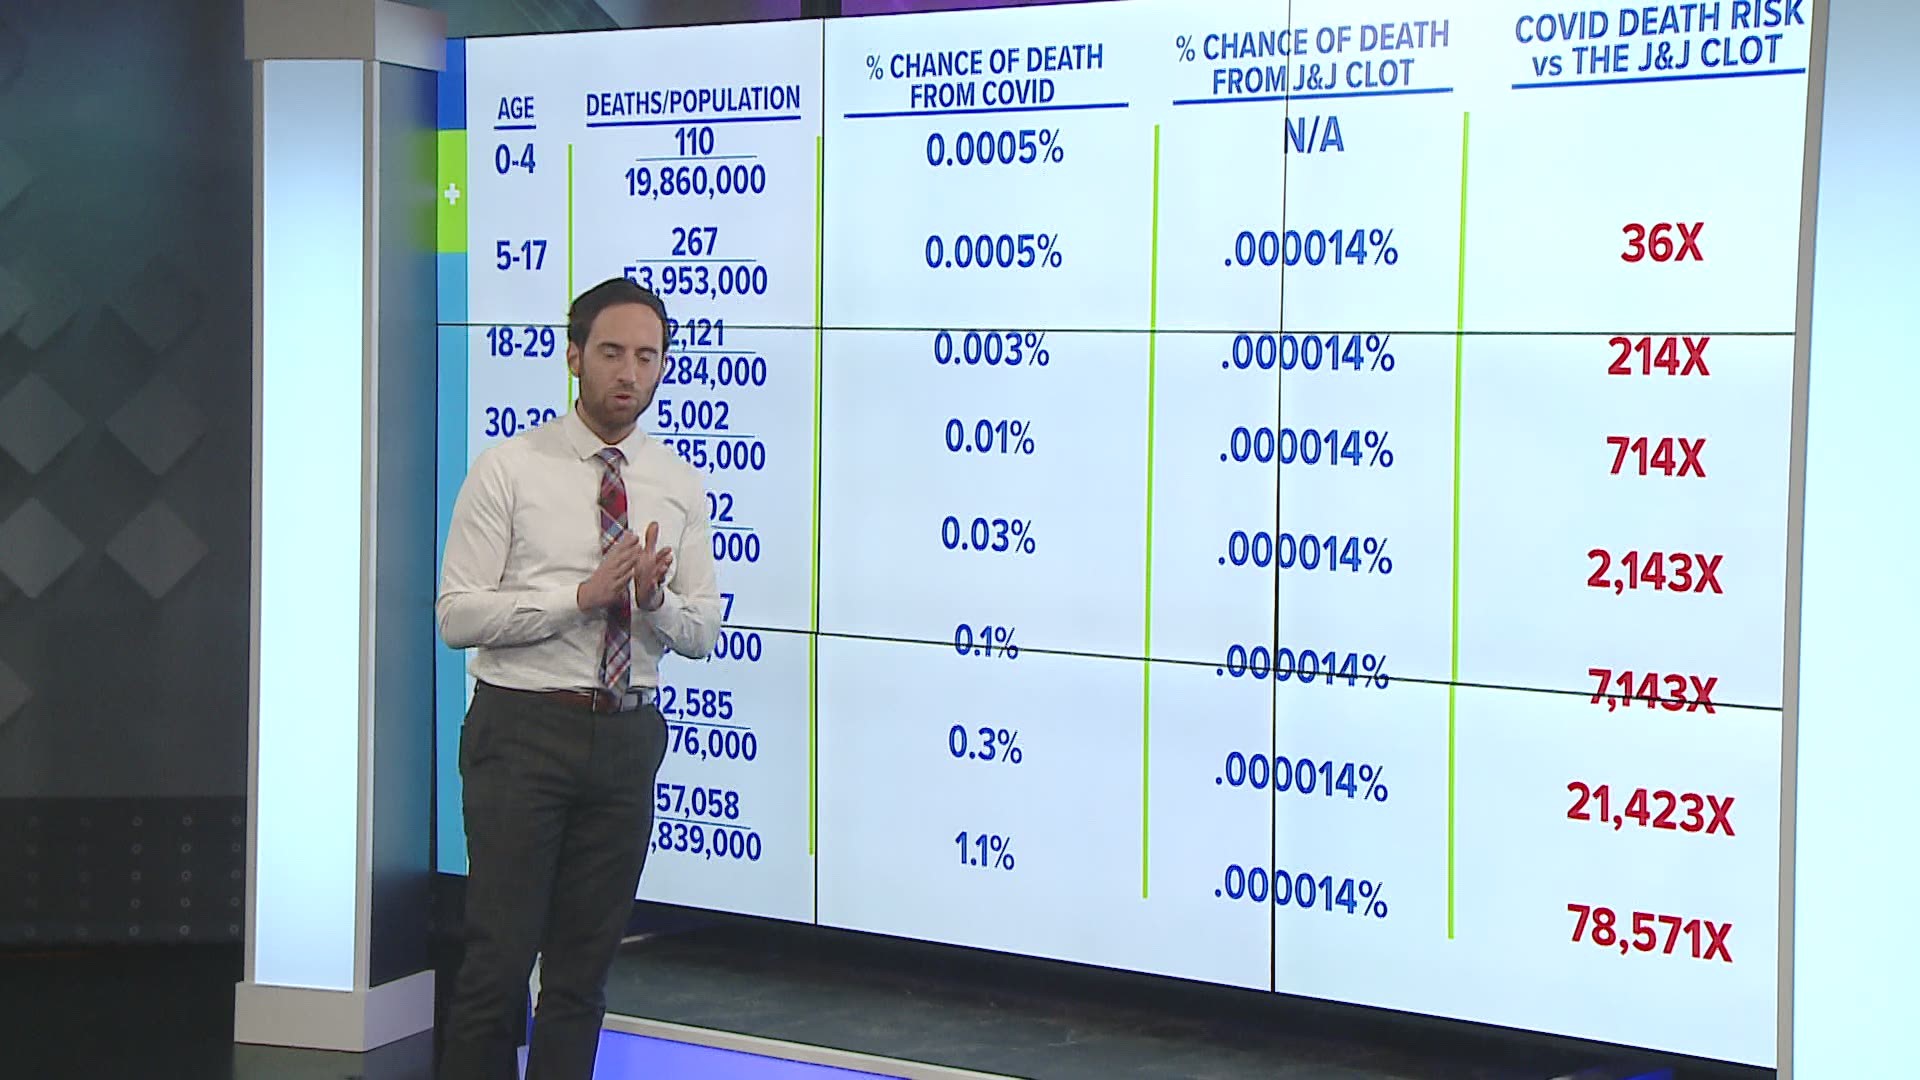 NEWS CENTER Maine's Keith Carson breaks down the data and examines the chances of dying from a blood clot compared to dying from COVID-19